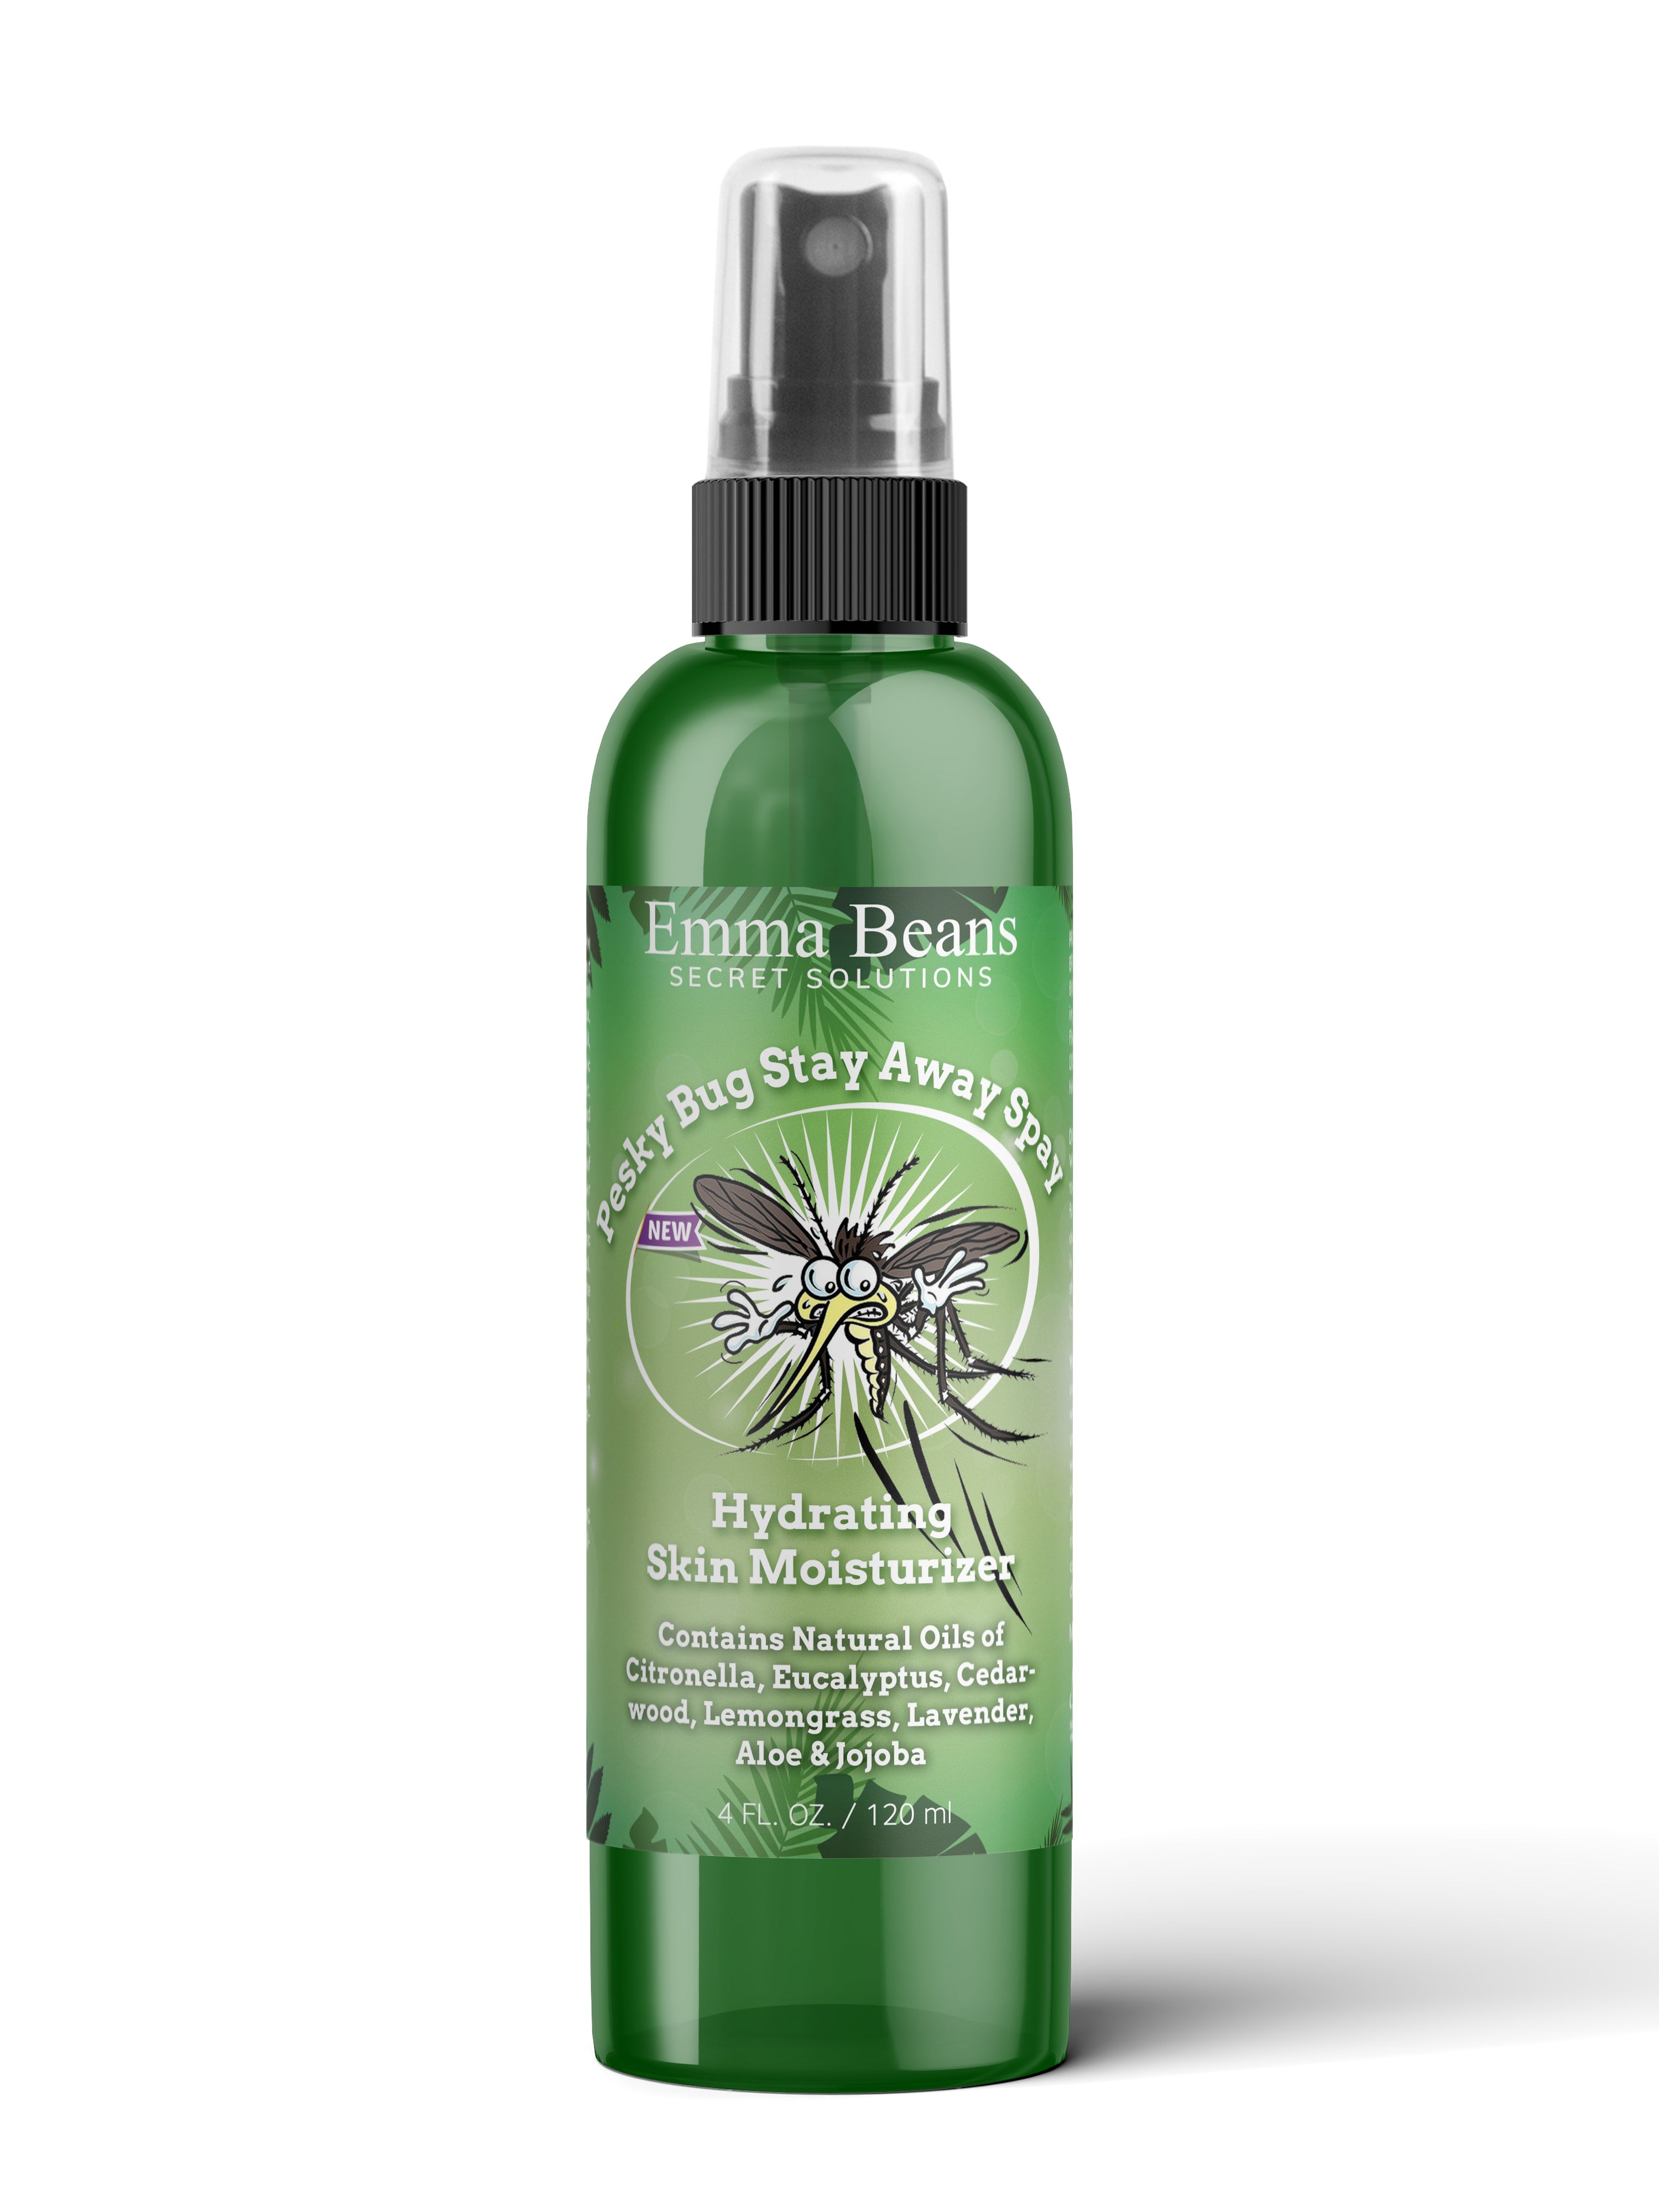 A PESKY® Bug Stay Away Spray and Natural Hydrating Skin Moisturizer - Home  of Emma Beans Magic Pain Away & PESKY Products